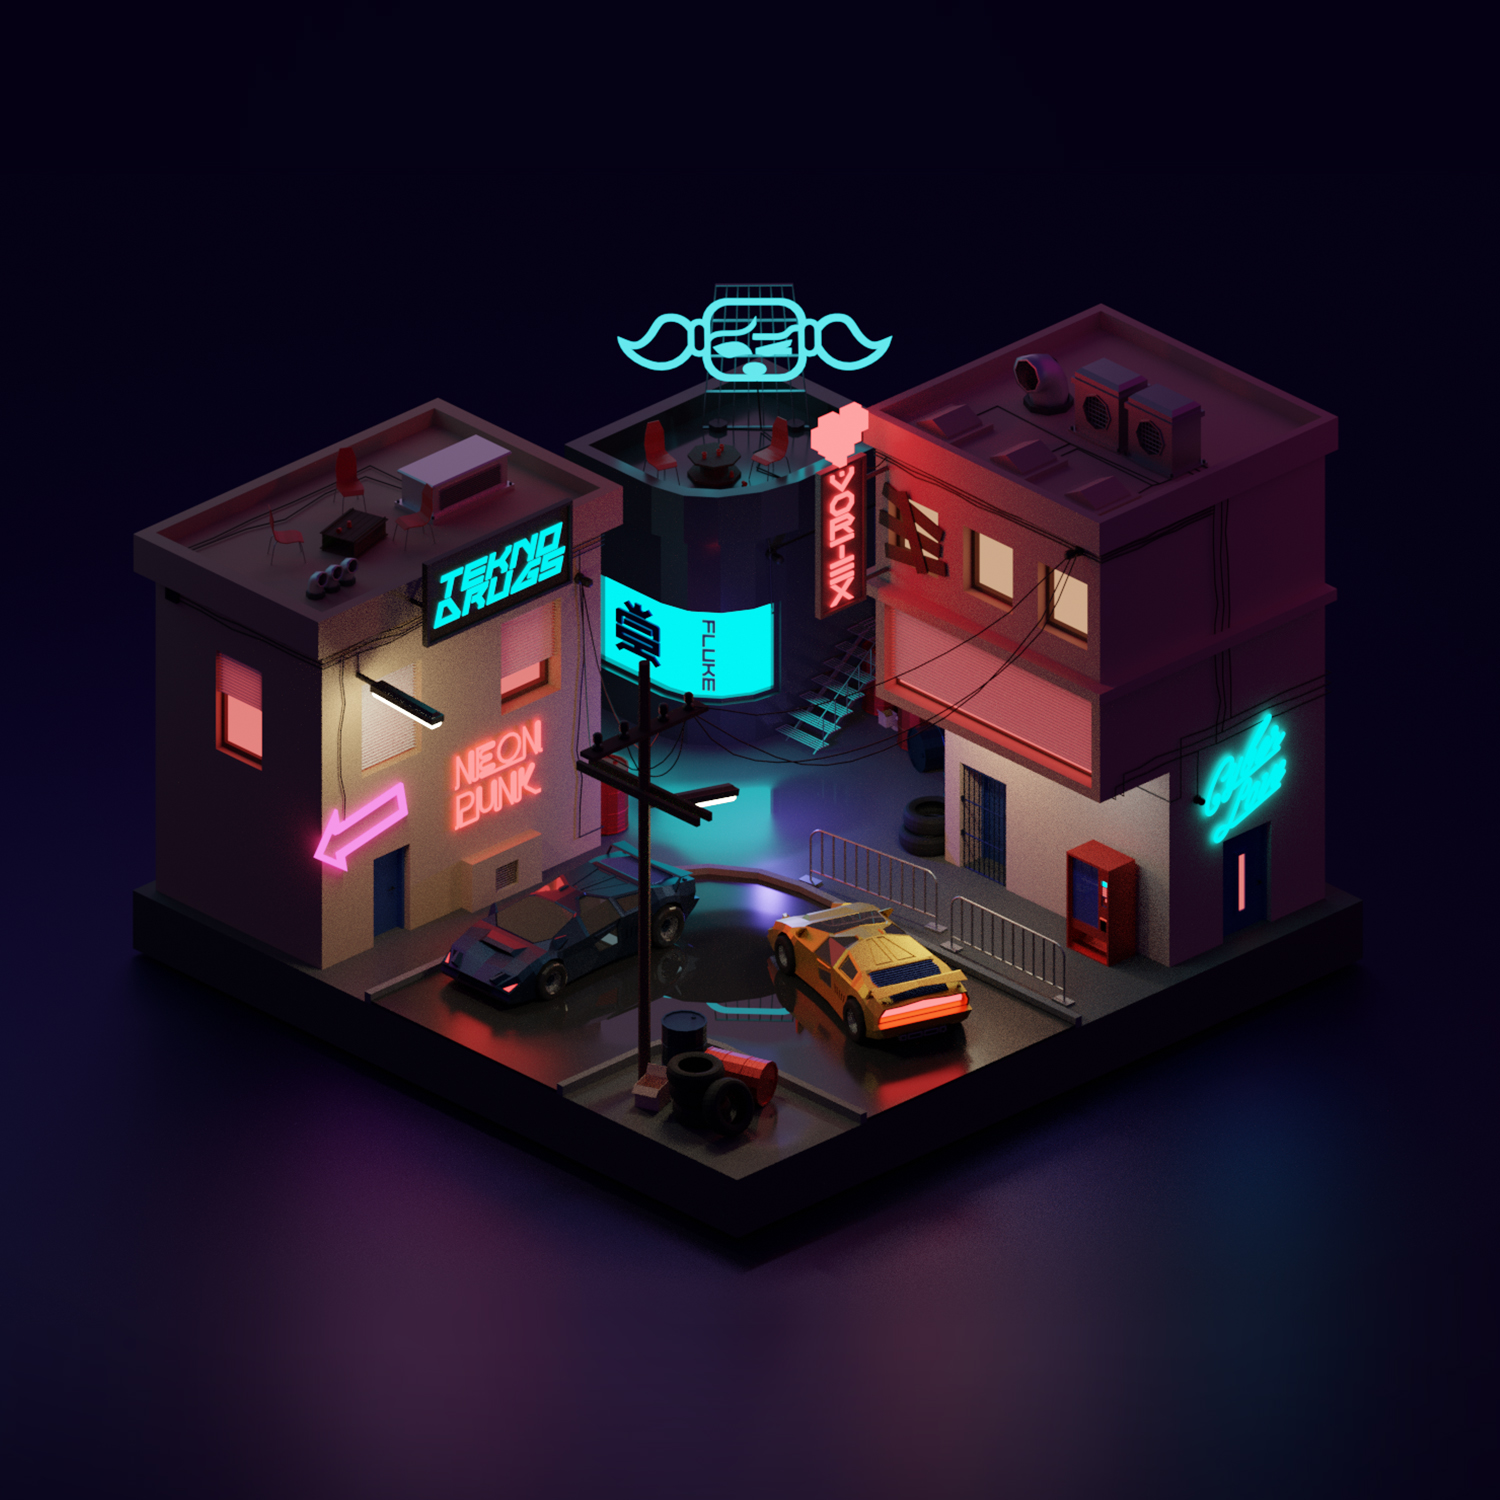 LowPoly 3d Ilustration